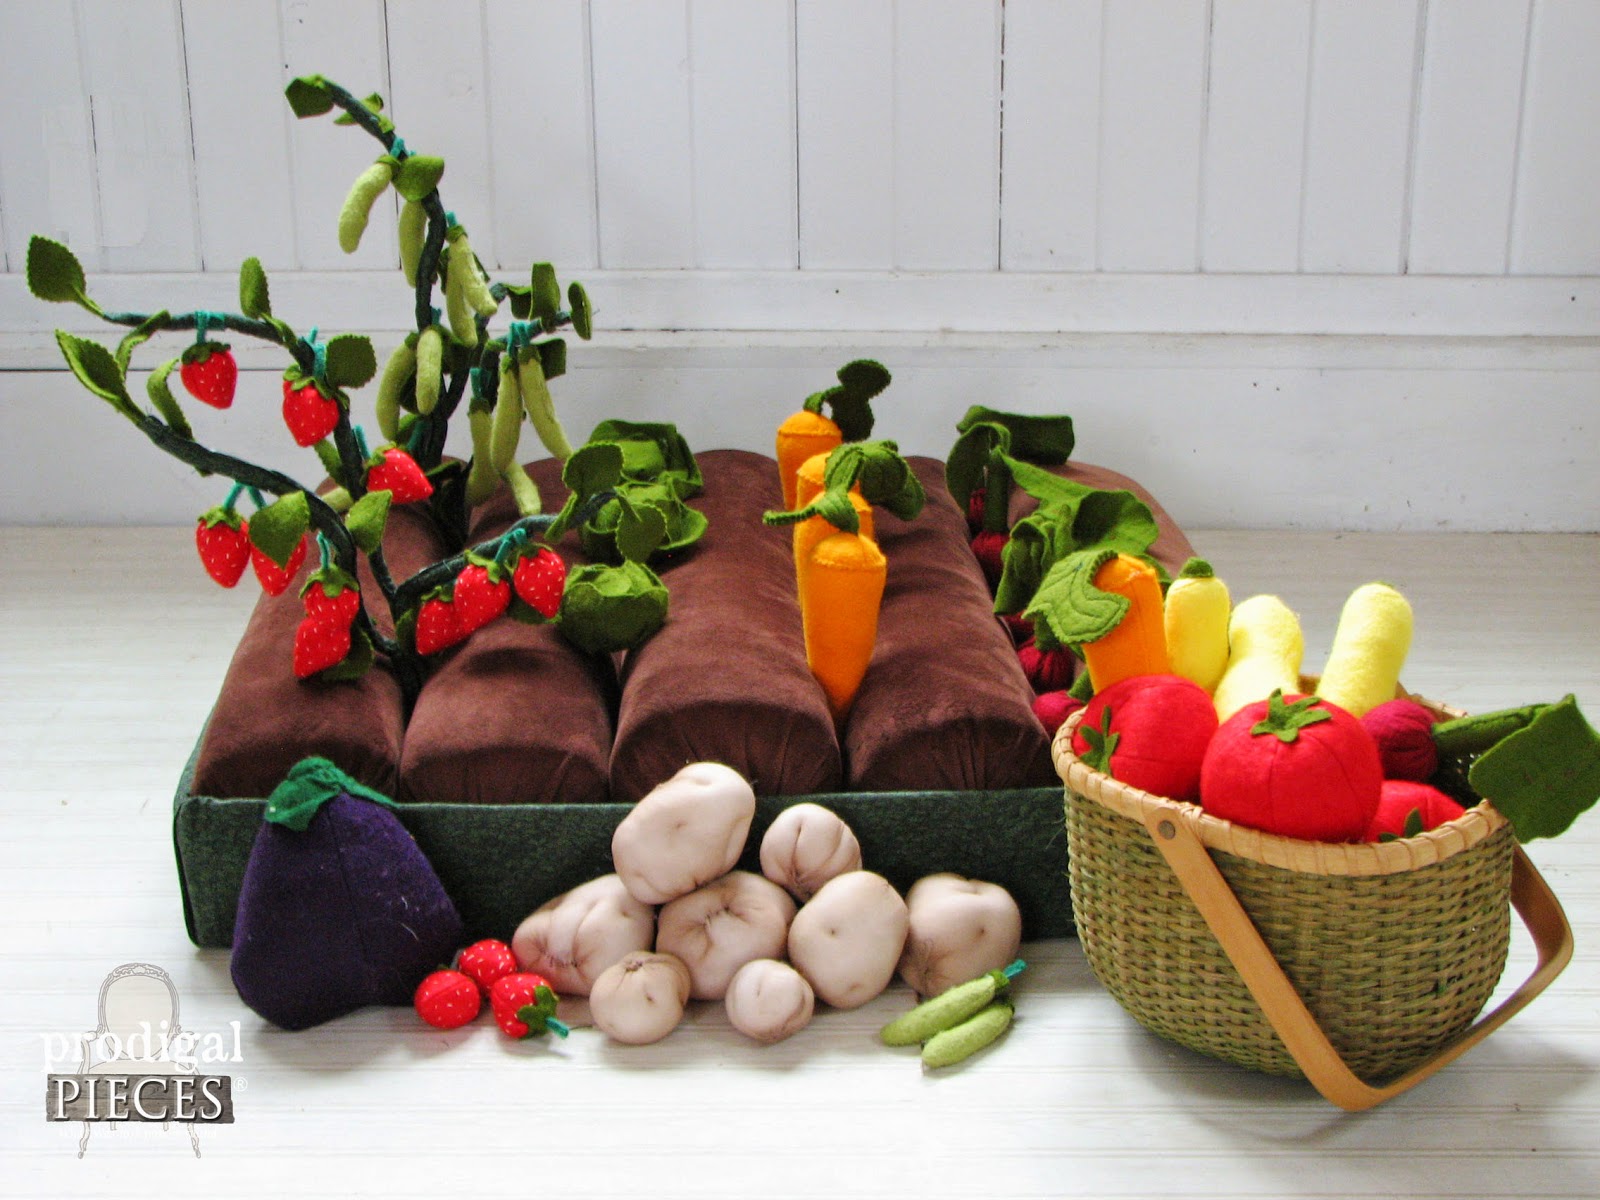 Handmade Holidays #4: Plantable Garden Vegetables & Fruits Pretend Play Set by Prodigal Pieces | prodigalpieces.com #prodigalpieces